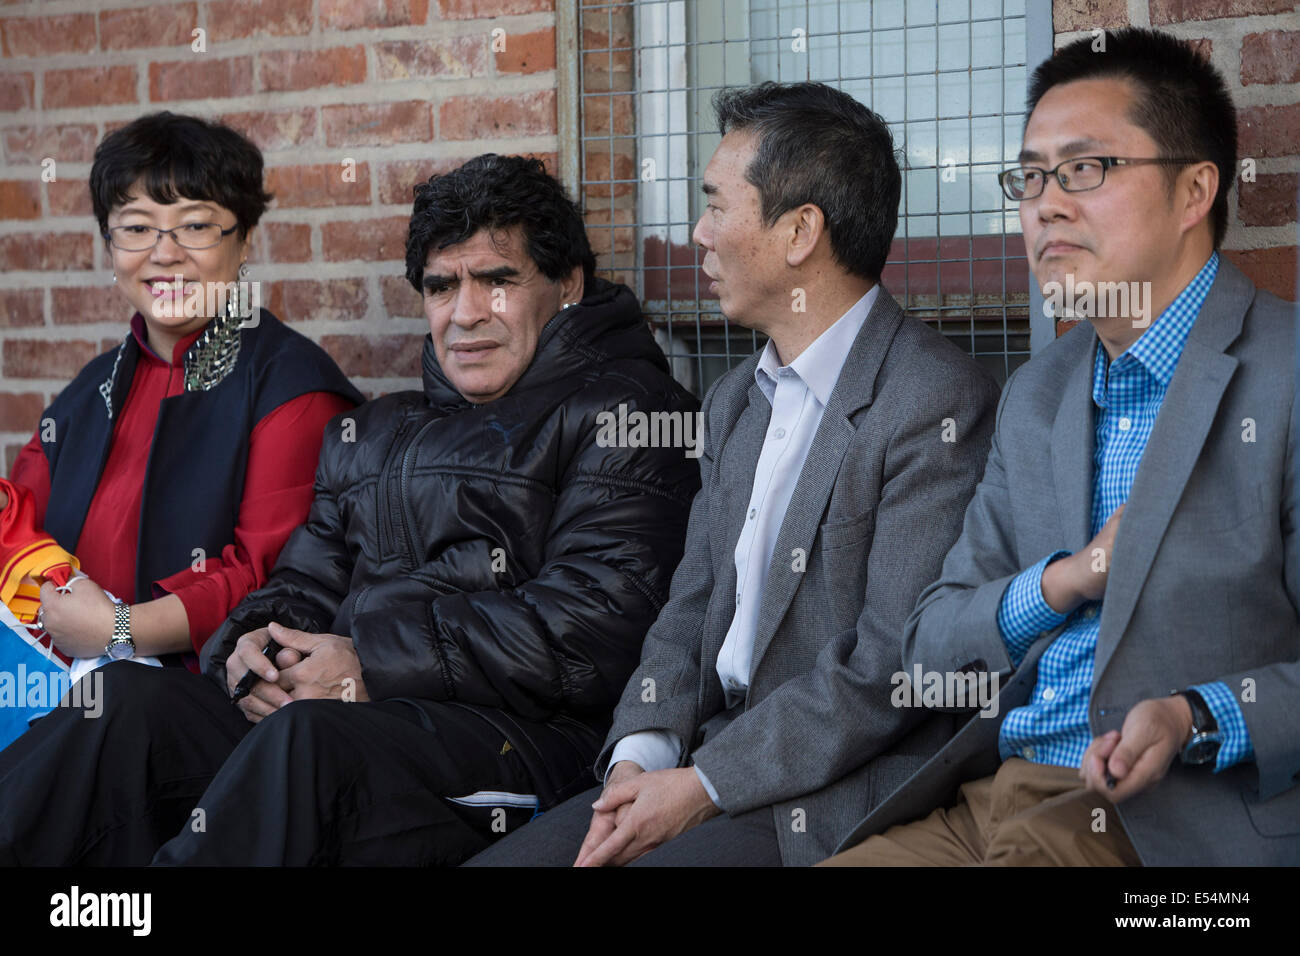 (140720) -- BUENOS AIRES, July 20, 2014 (Xinhua) -- The former player and coach of Argentina National Team, Diego Armando Maradona (2nd L), watches with the Cultural Counselor of the Chinese Embassy in Buenos Aires, Han Mengtang (2nd R) a training session in the sector 'Casa Amarilla' of Alberto J. Armando Stadium also known as 'La Bombonera', in the city of Buenos Aires, capital of Argentina, on July 20, 2014. The athletes belong to the first group of 60 players of the youth selection of Beijing as part of an agreement of sport association with the government of Beijing and the Athletic Club Stock Photo